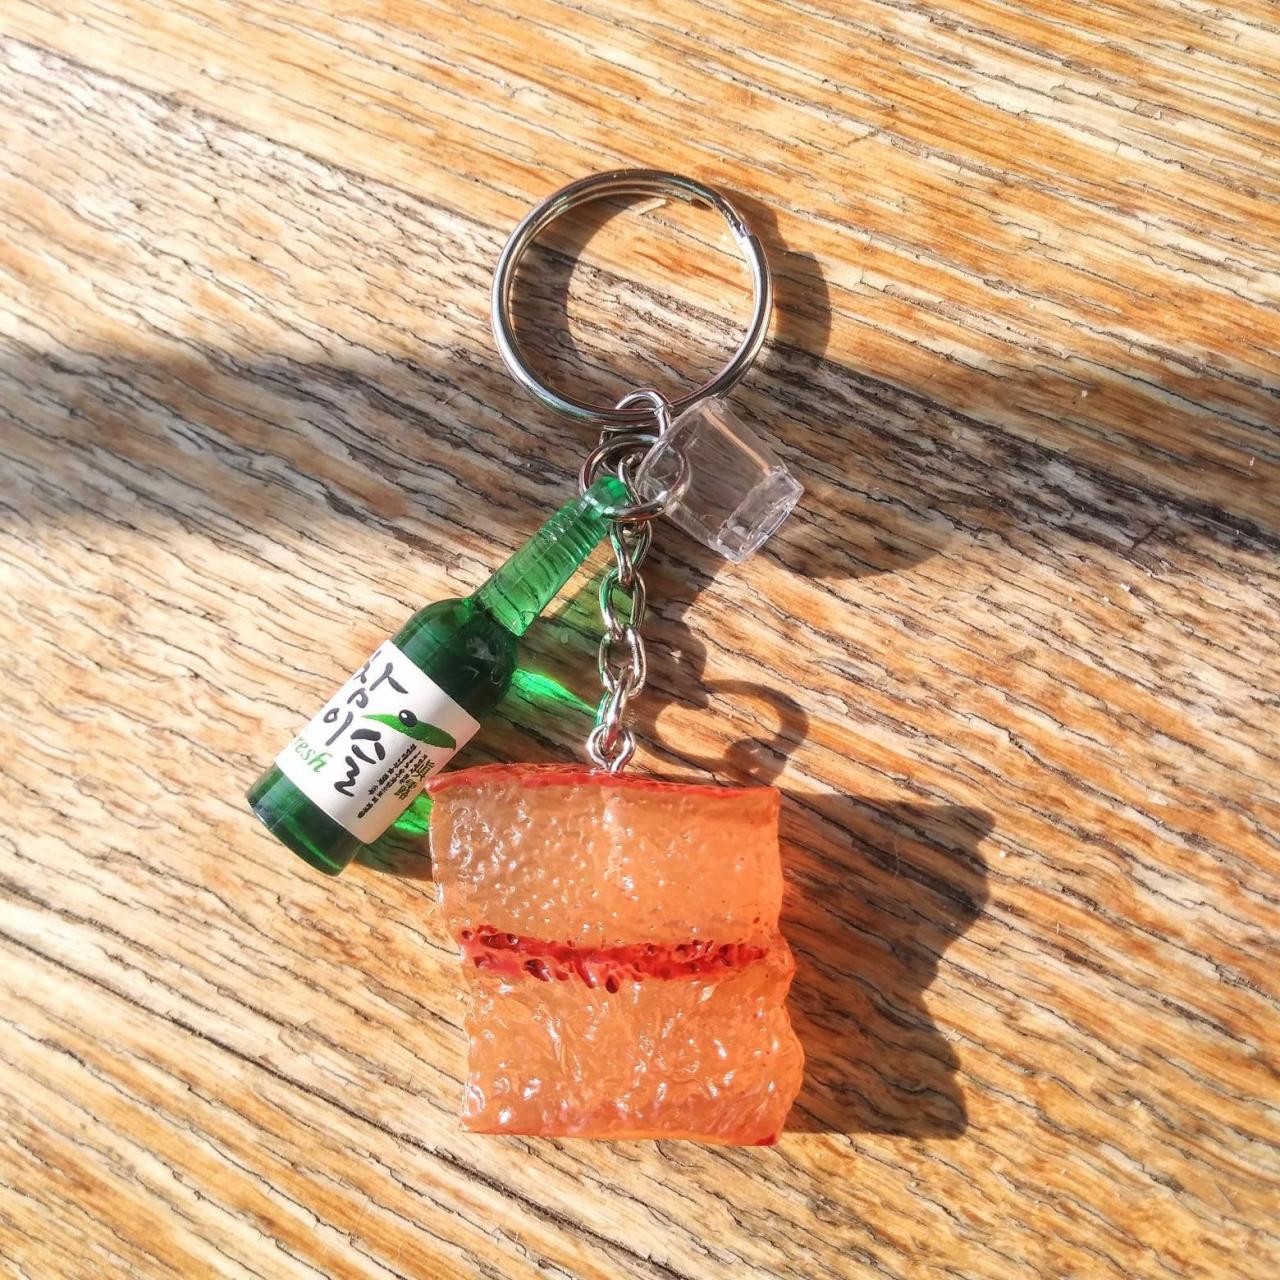 Korean Bbq Keychain, Korean Soju Bottle With Shot Glass And Grilled Pork Belly Keychain, Funny Keychain, Food And Drink